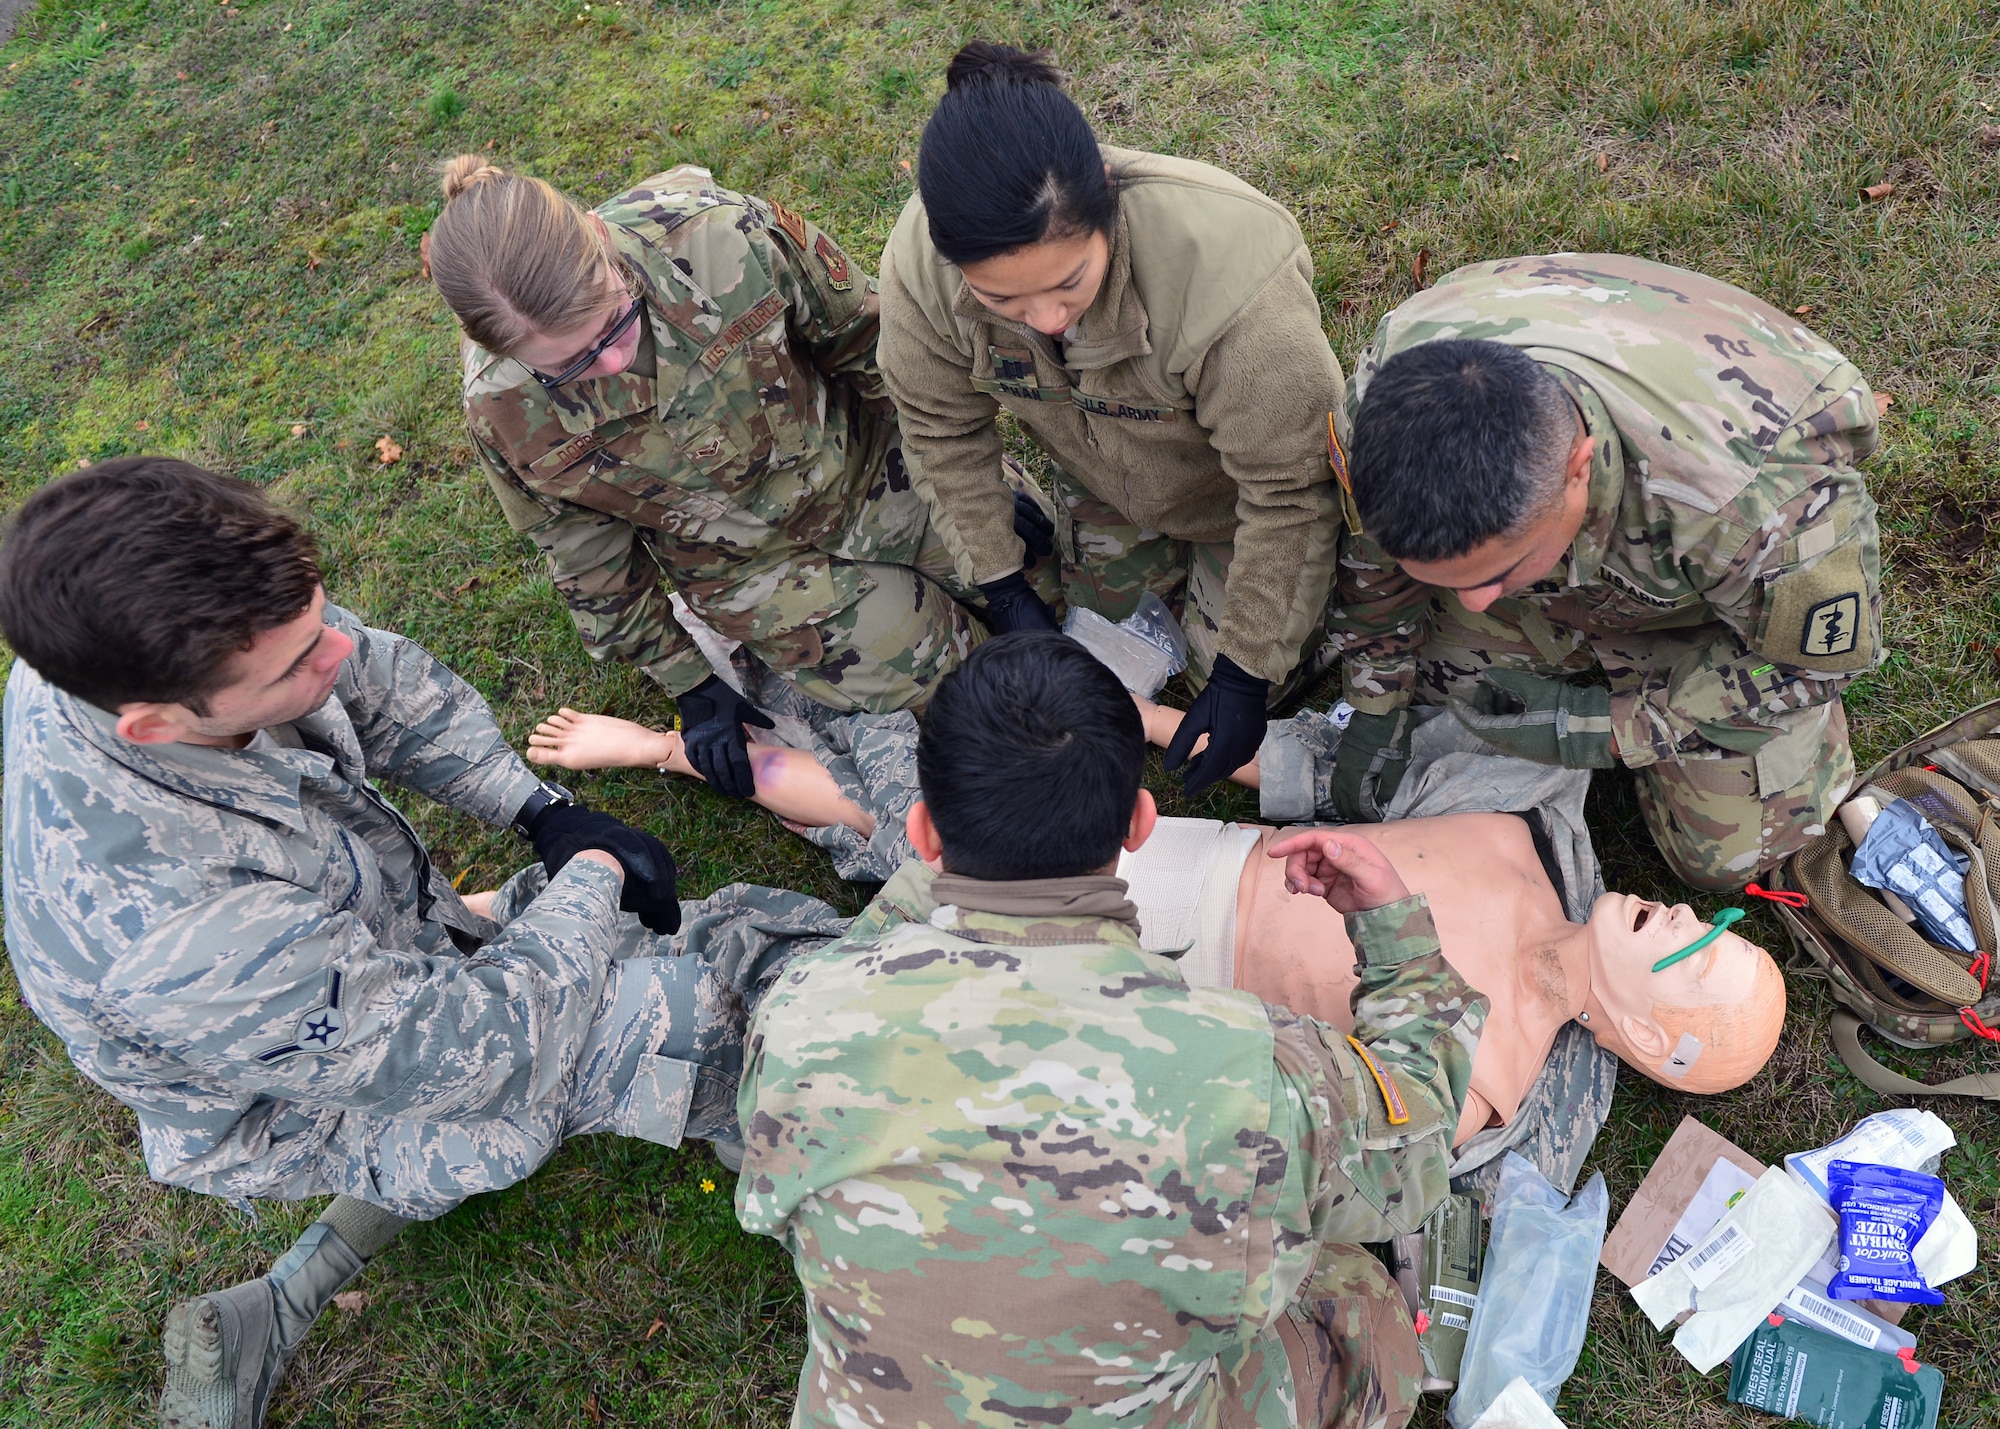 U.S. Airmen and Soldiers assigned throughout the Kaiserslautern Military Community provide medical care to a simulated casualty during a joint medical training event at Ramstein Air Base, Germany, Nov. 15, 2019. The training event builds partnerships between sister services to improve response procedures in real-world scenarios. (U.S. Air Force photo by Staff Sgt. Jimmie D. Pike)